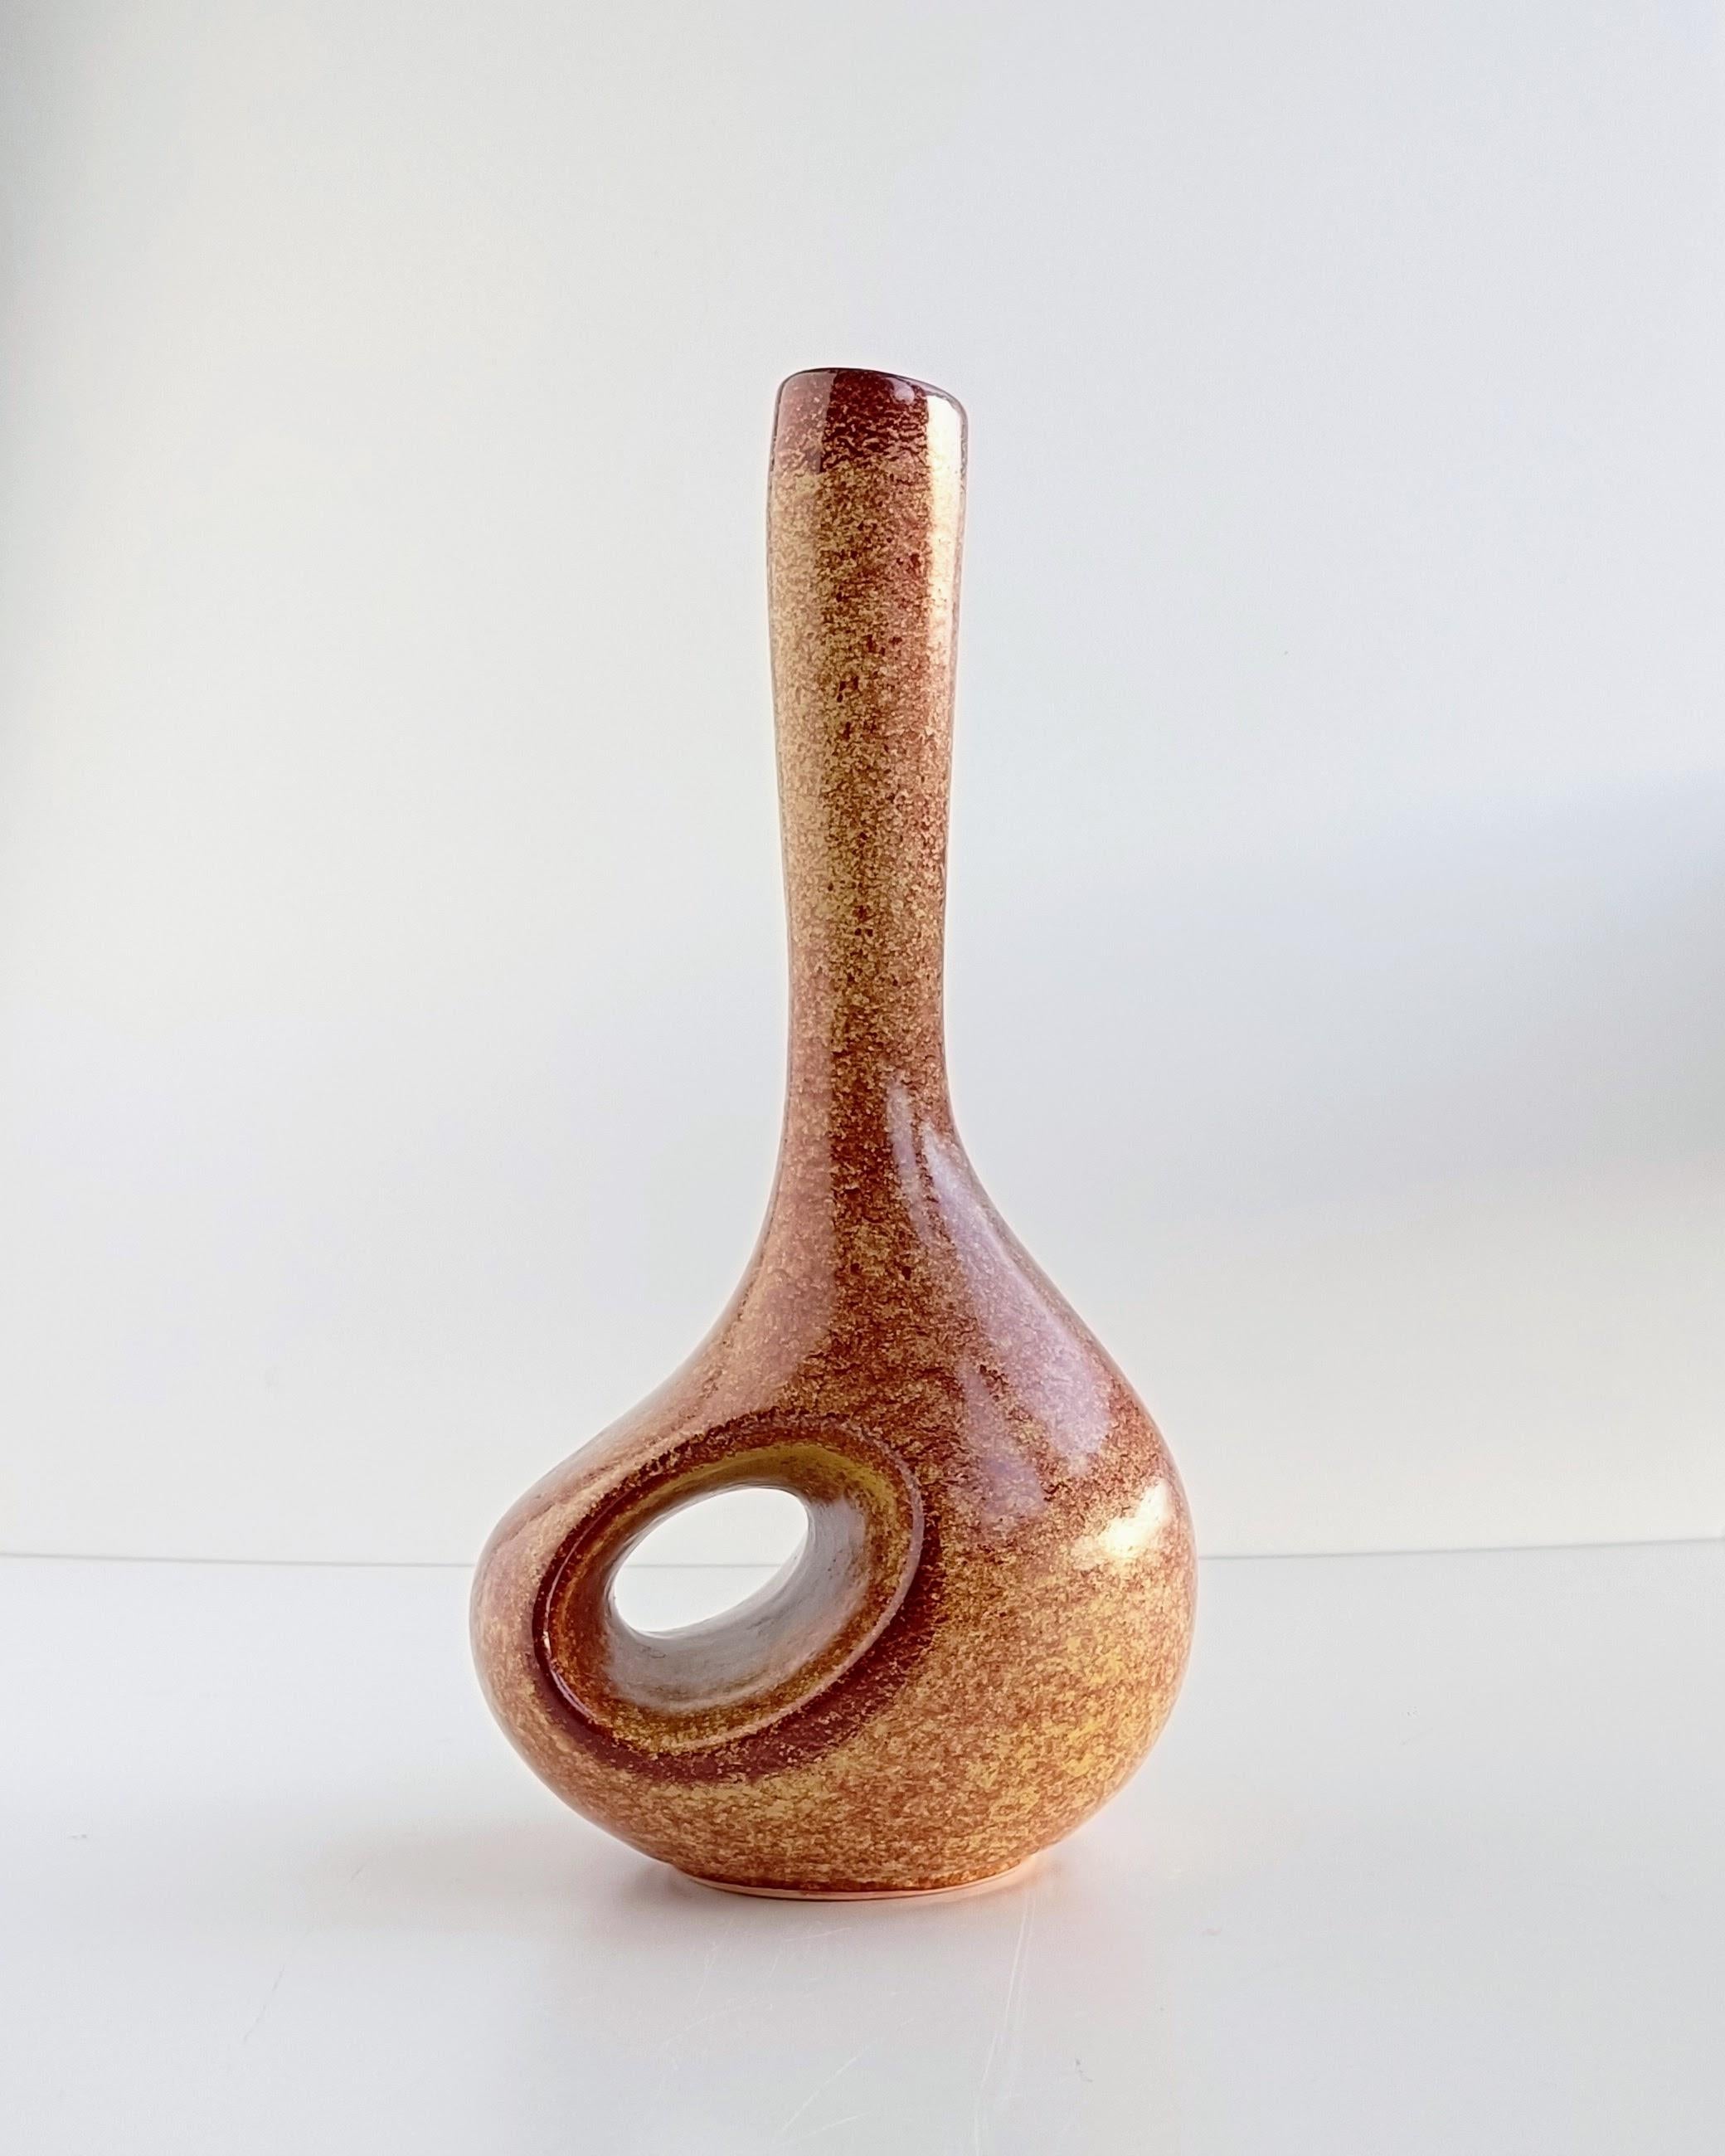 Sculptural Mid Century Modern chimney ceramic vase by Roberto Rigone for Bertoncello Ceramiche. Featuring the Tobacco classic mottled tan color, this beautifully designed piece is marked with a code number and was  hand produced in Vicenza, Italy,